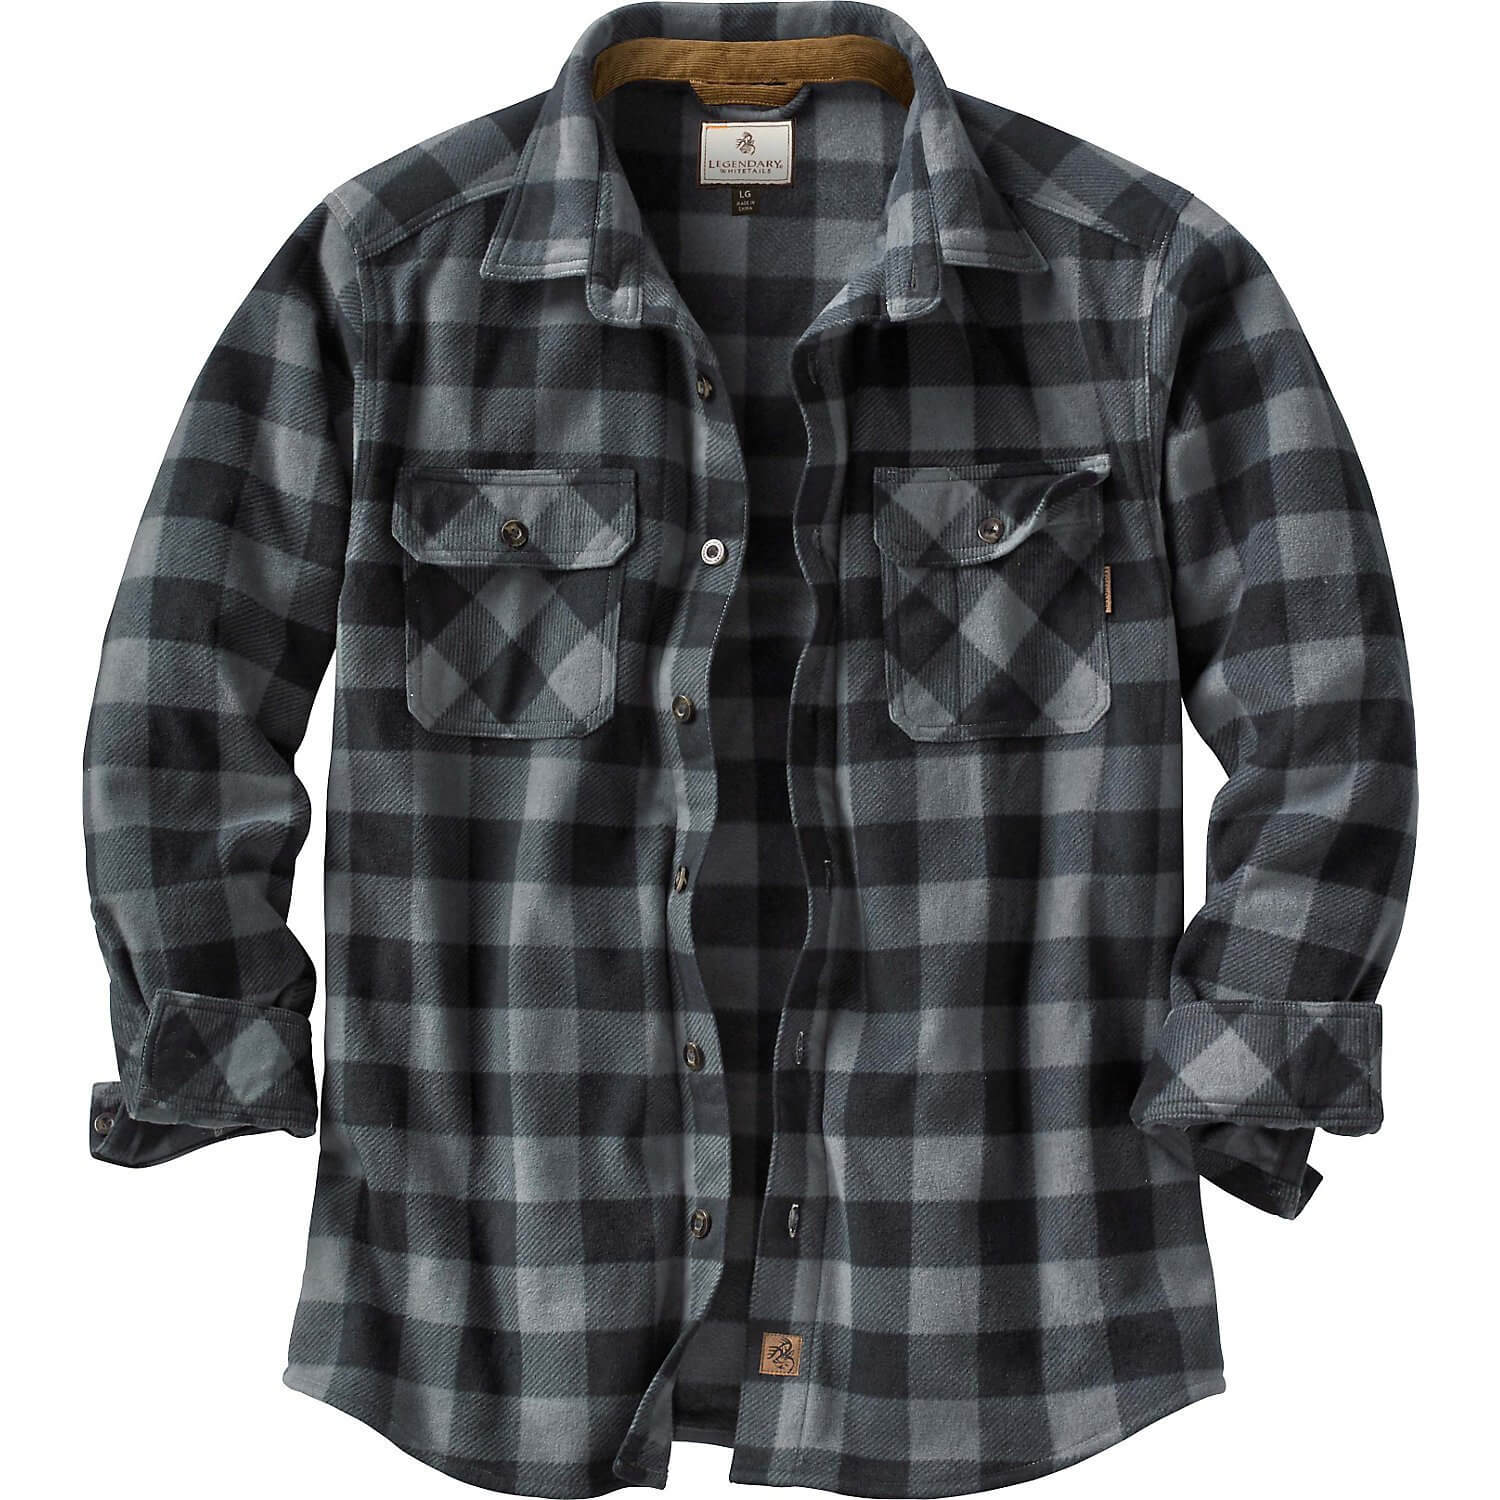 The Best Flannels For Men 2020